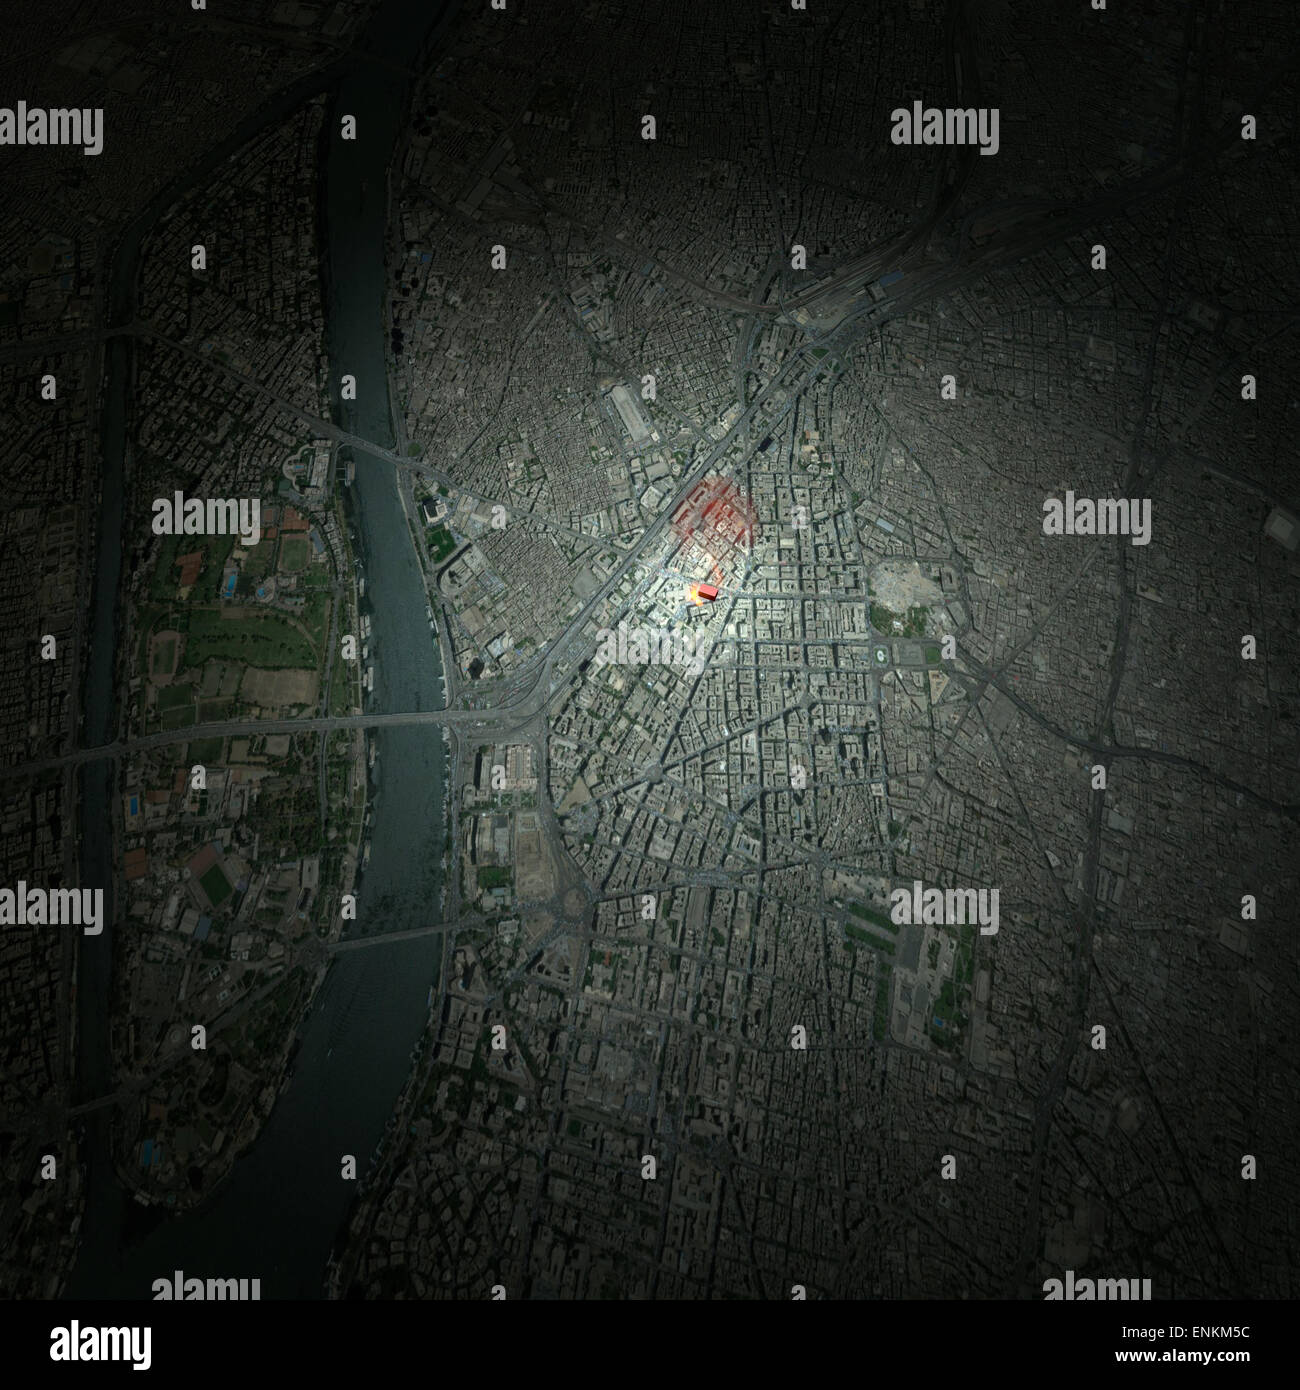 Map Of Downtown Of Cairo Illustration ENKM5C 